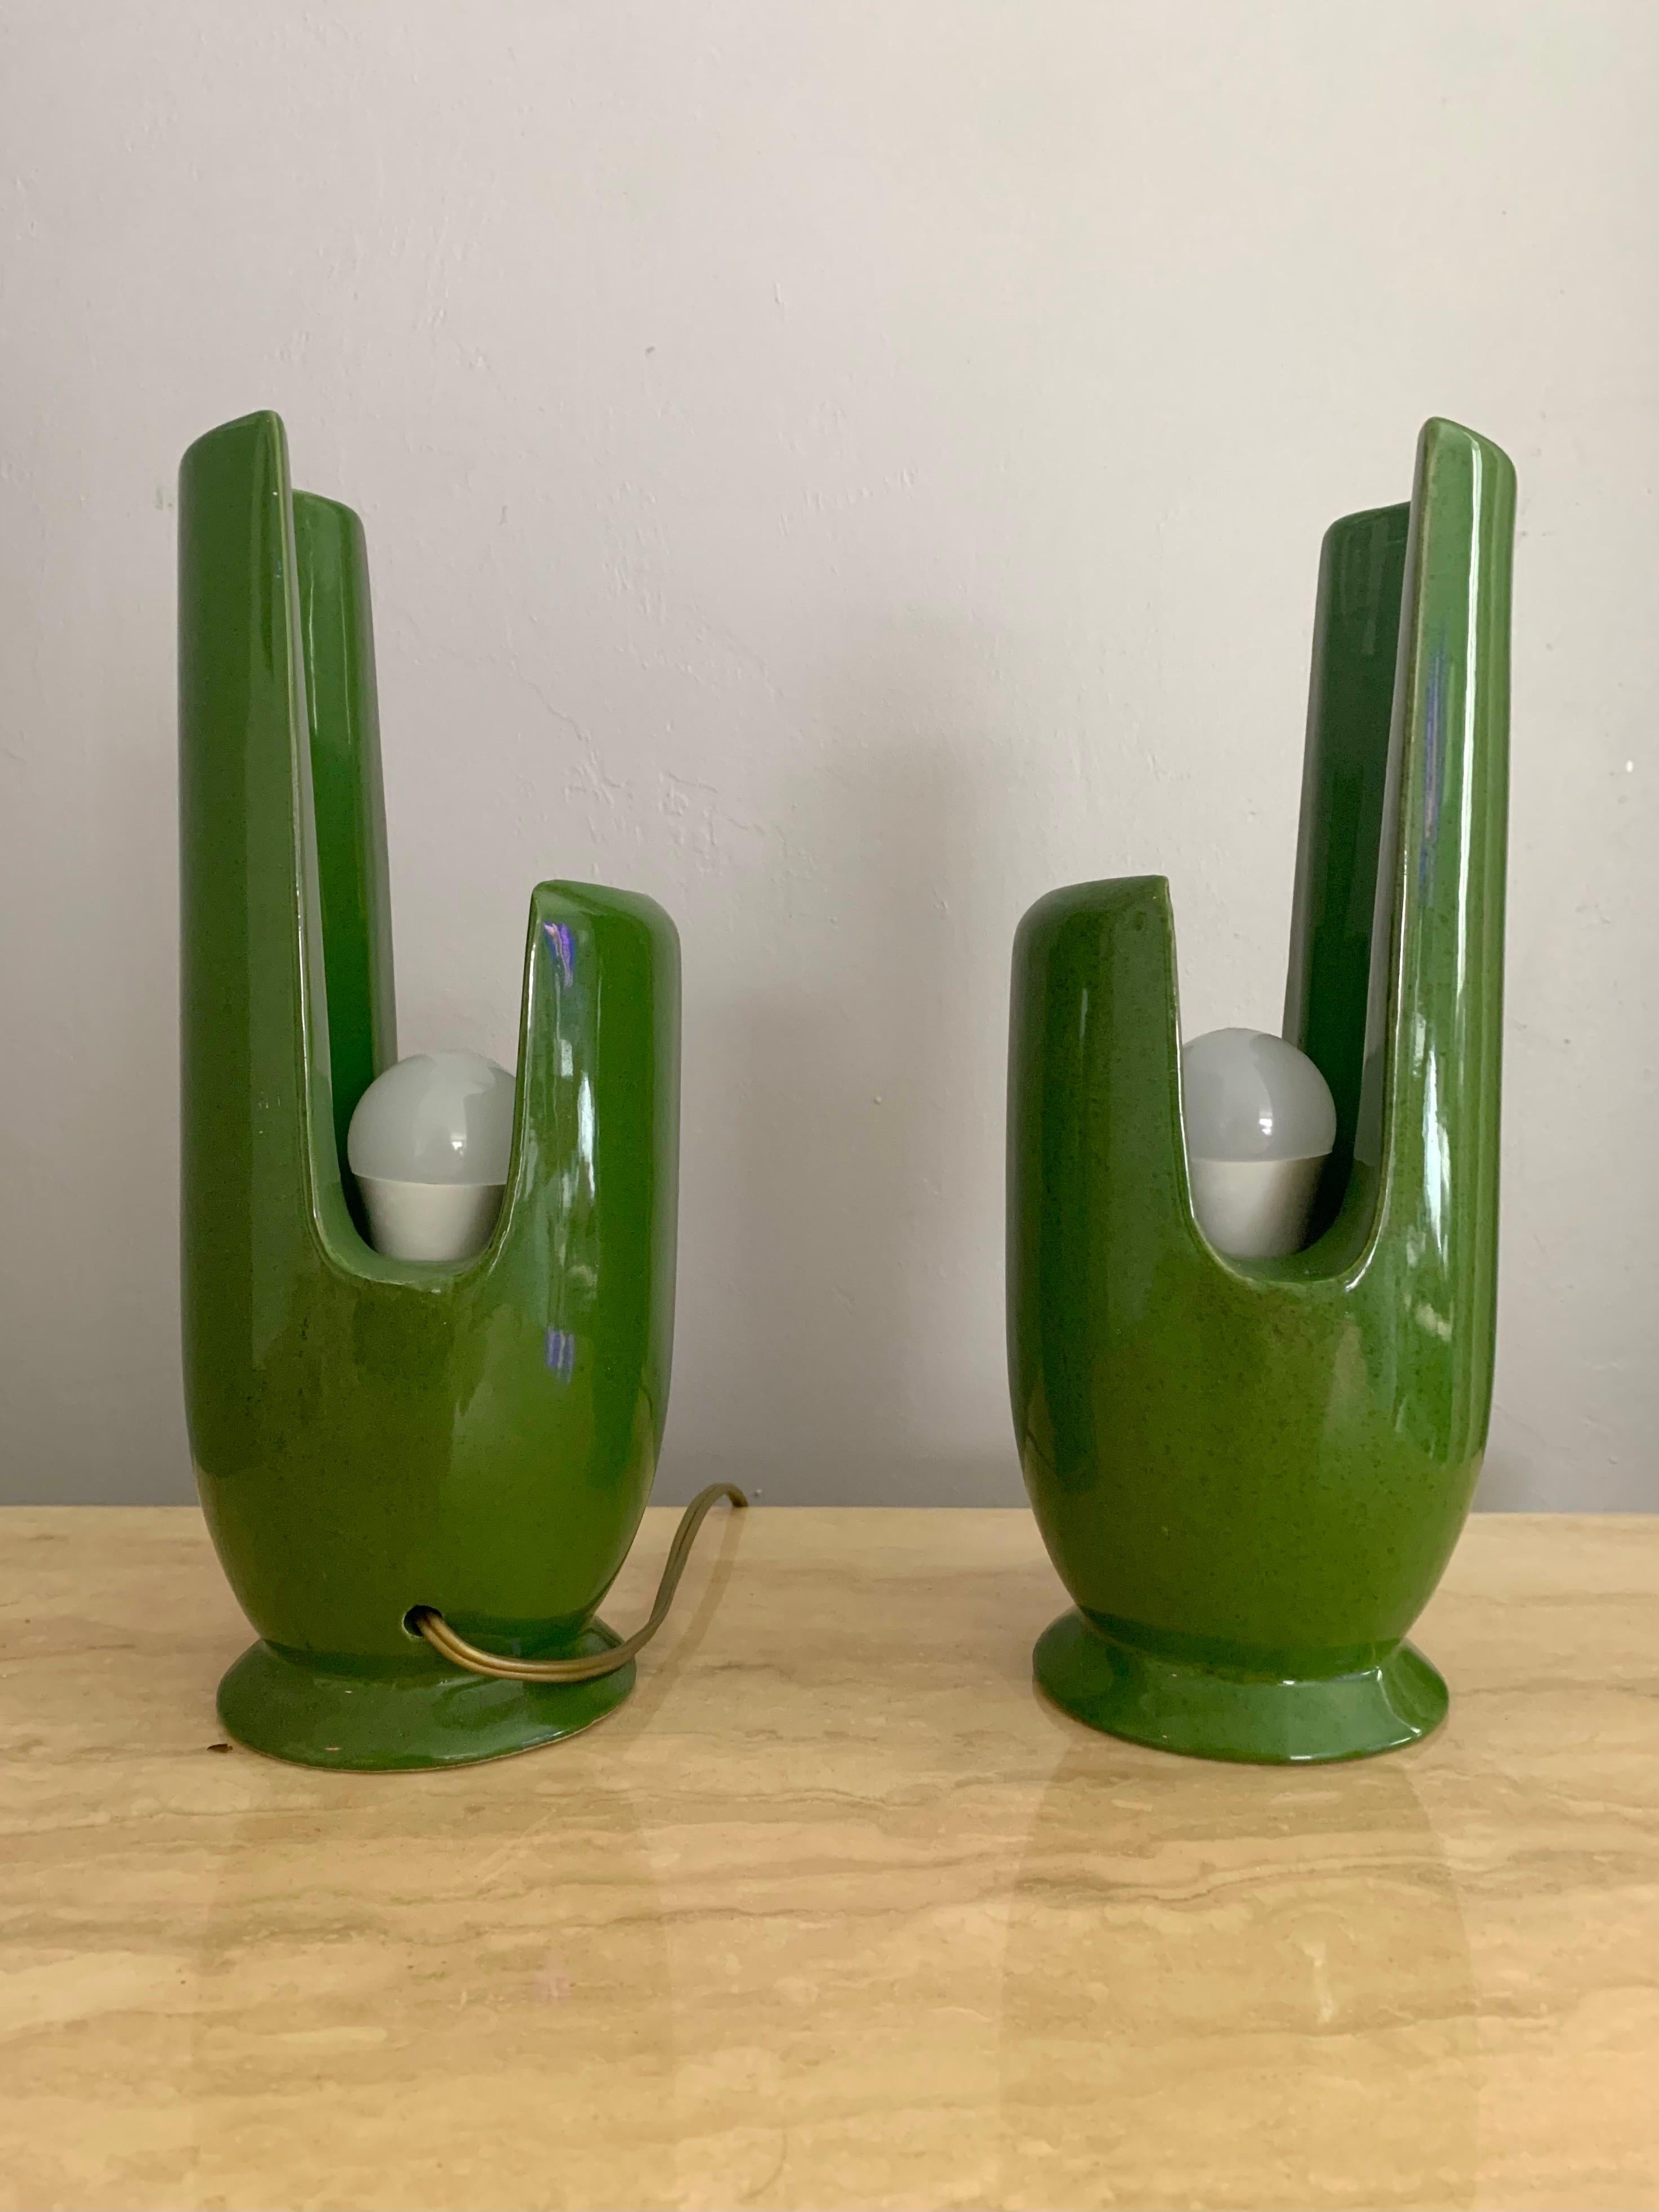 Beautiful and fun pair of ceramic lamps. Mid-Century Modern in design and era. Circa 1950s. The lamps have a playful organic and cubic shape which not only looks good but also allows you to direct the light depending on which way they are facing. If